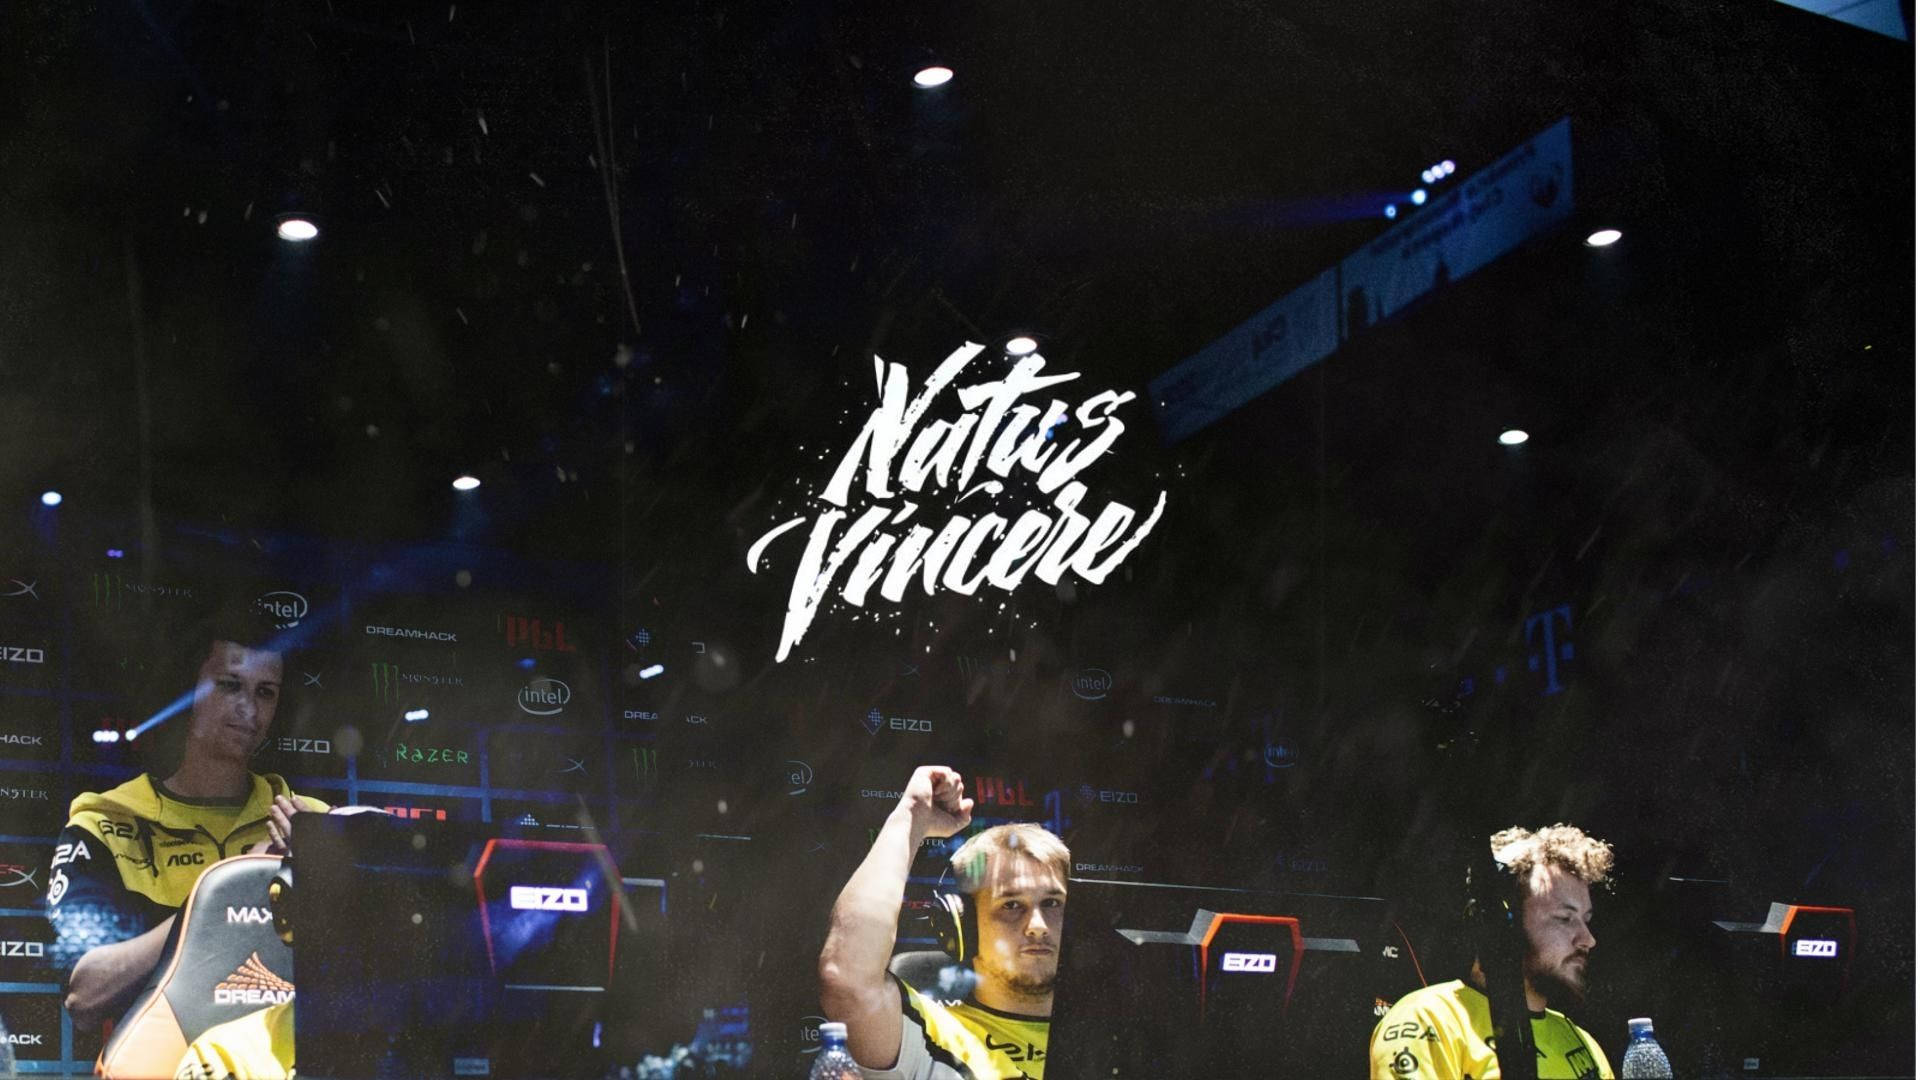 In Game Natus Vincere Background